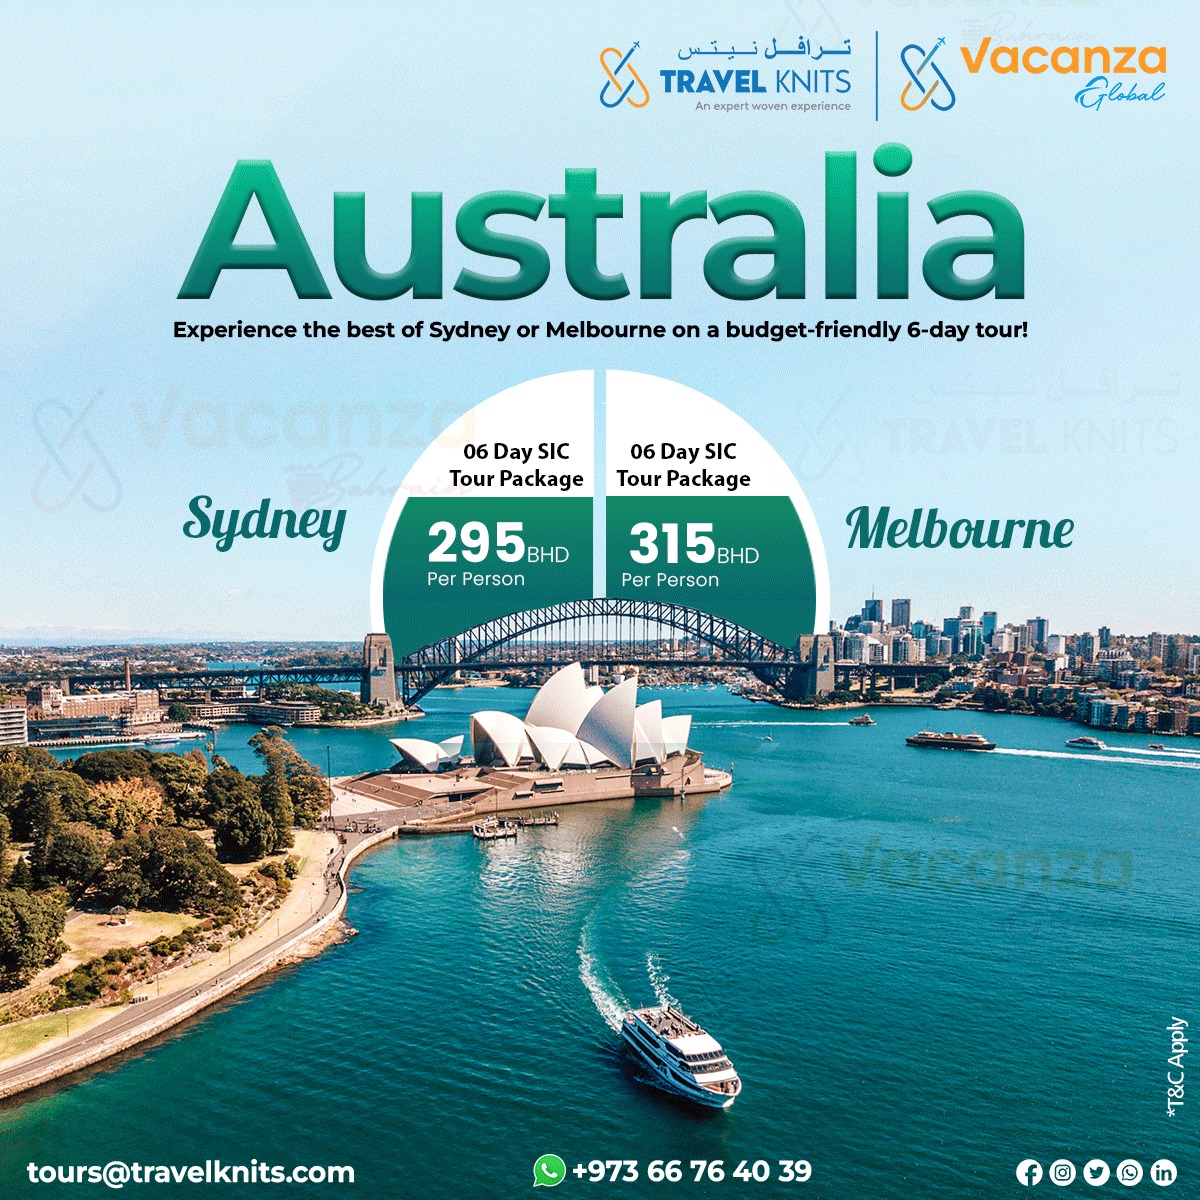 Melbourne packageTour Packages - Book honeymoon ,family,adventure tour packages to Melbourne package|Travel Knits